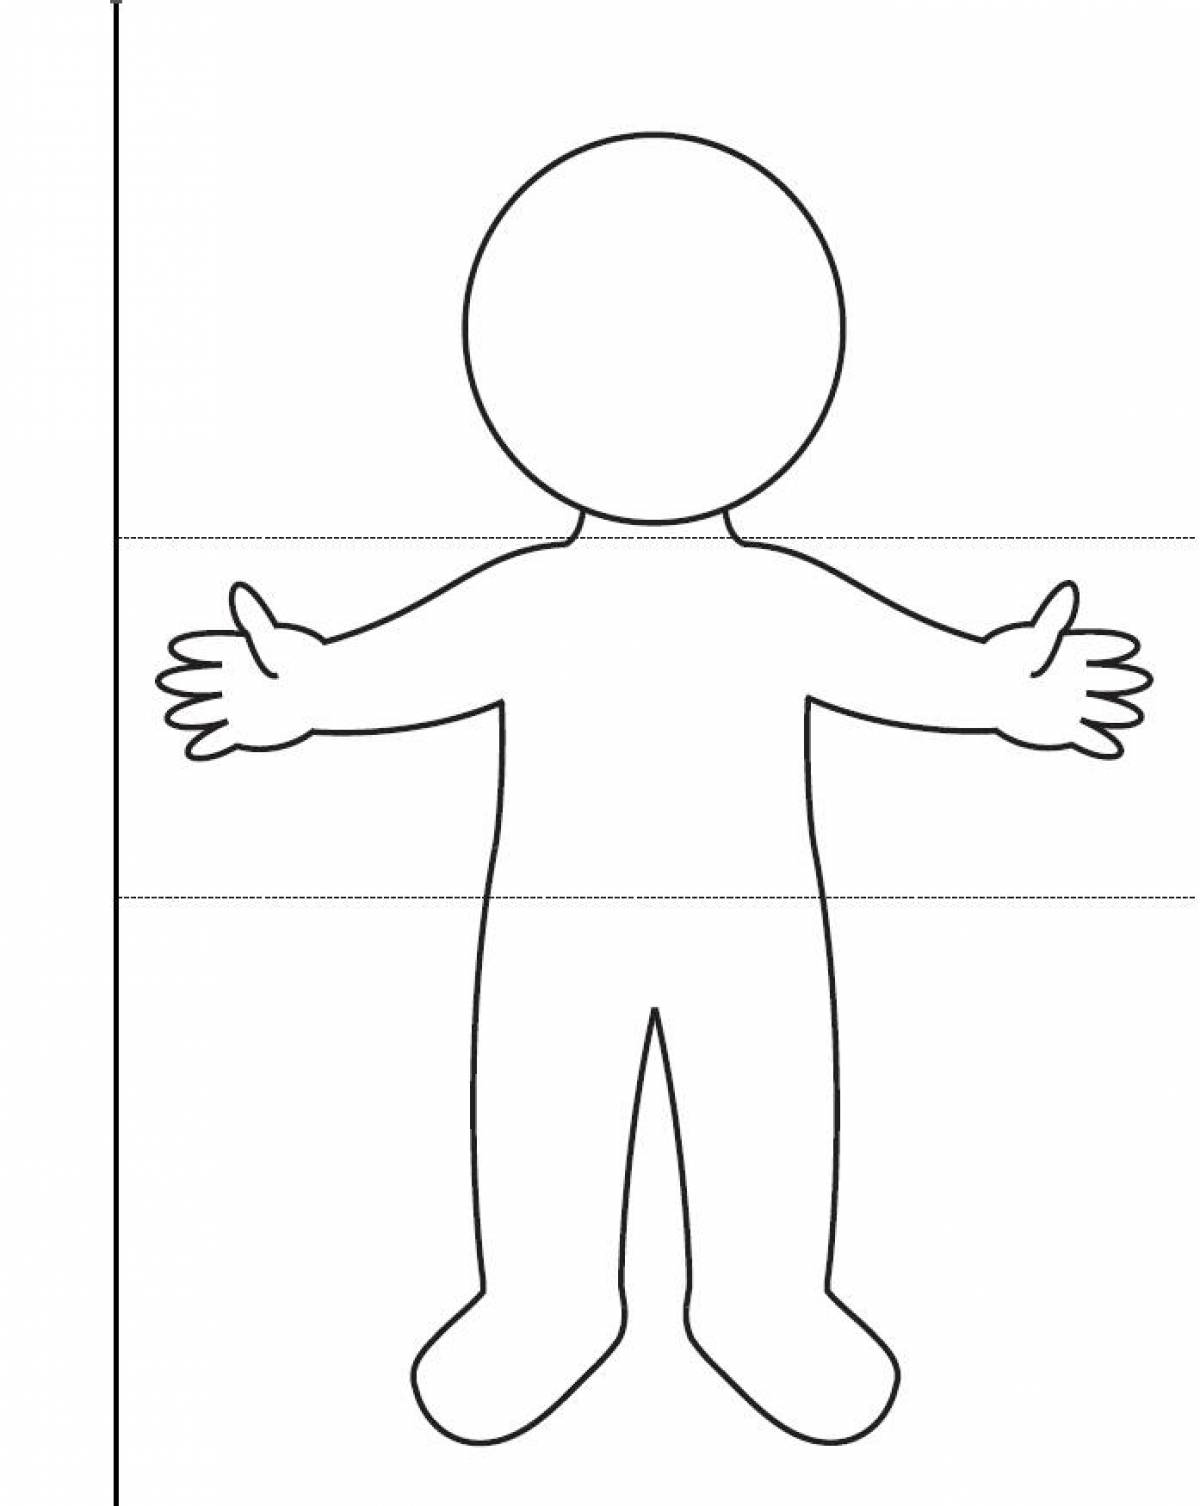 Cool coloring pages of body parts for kids